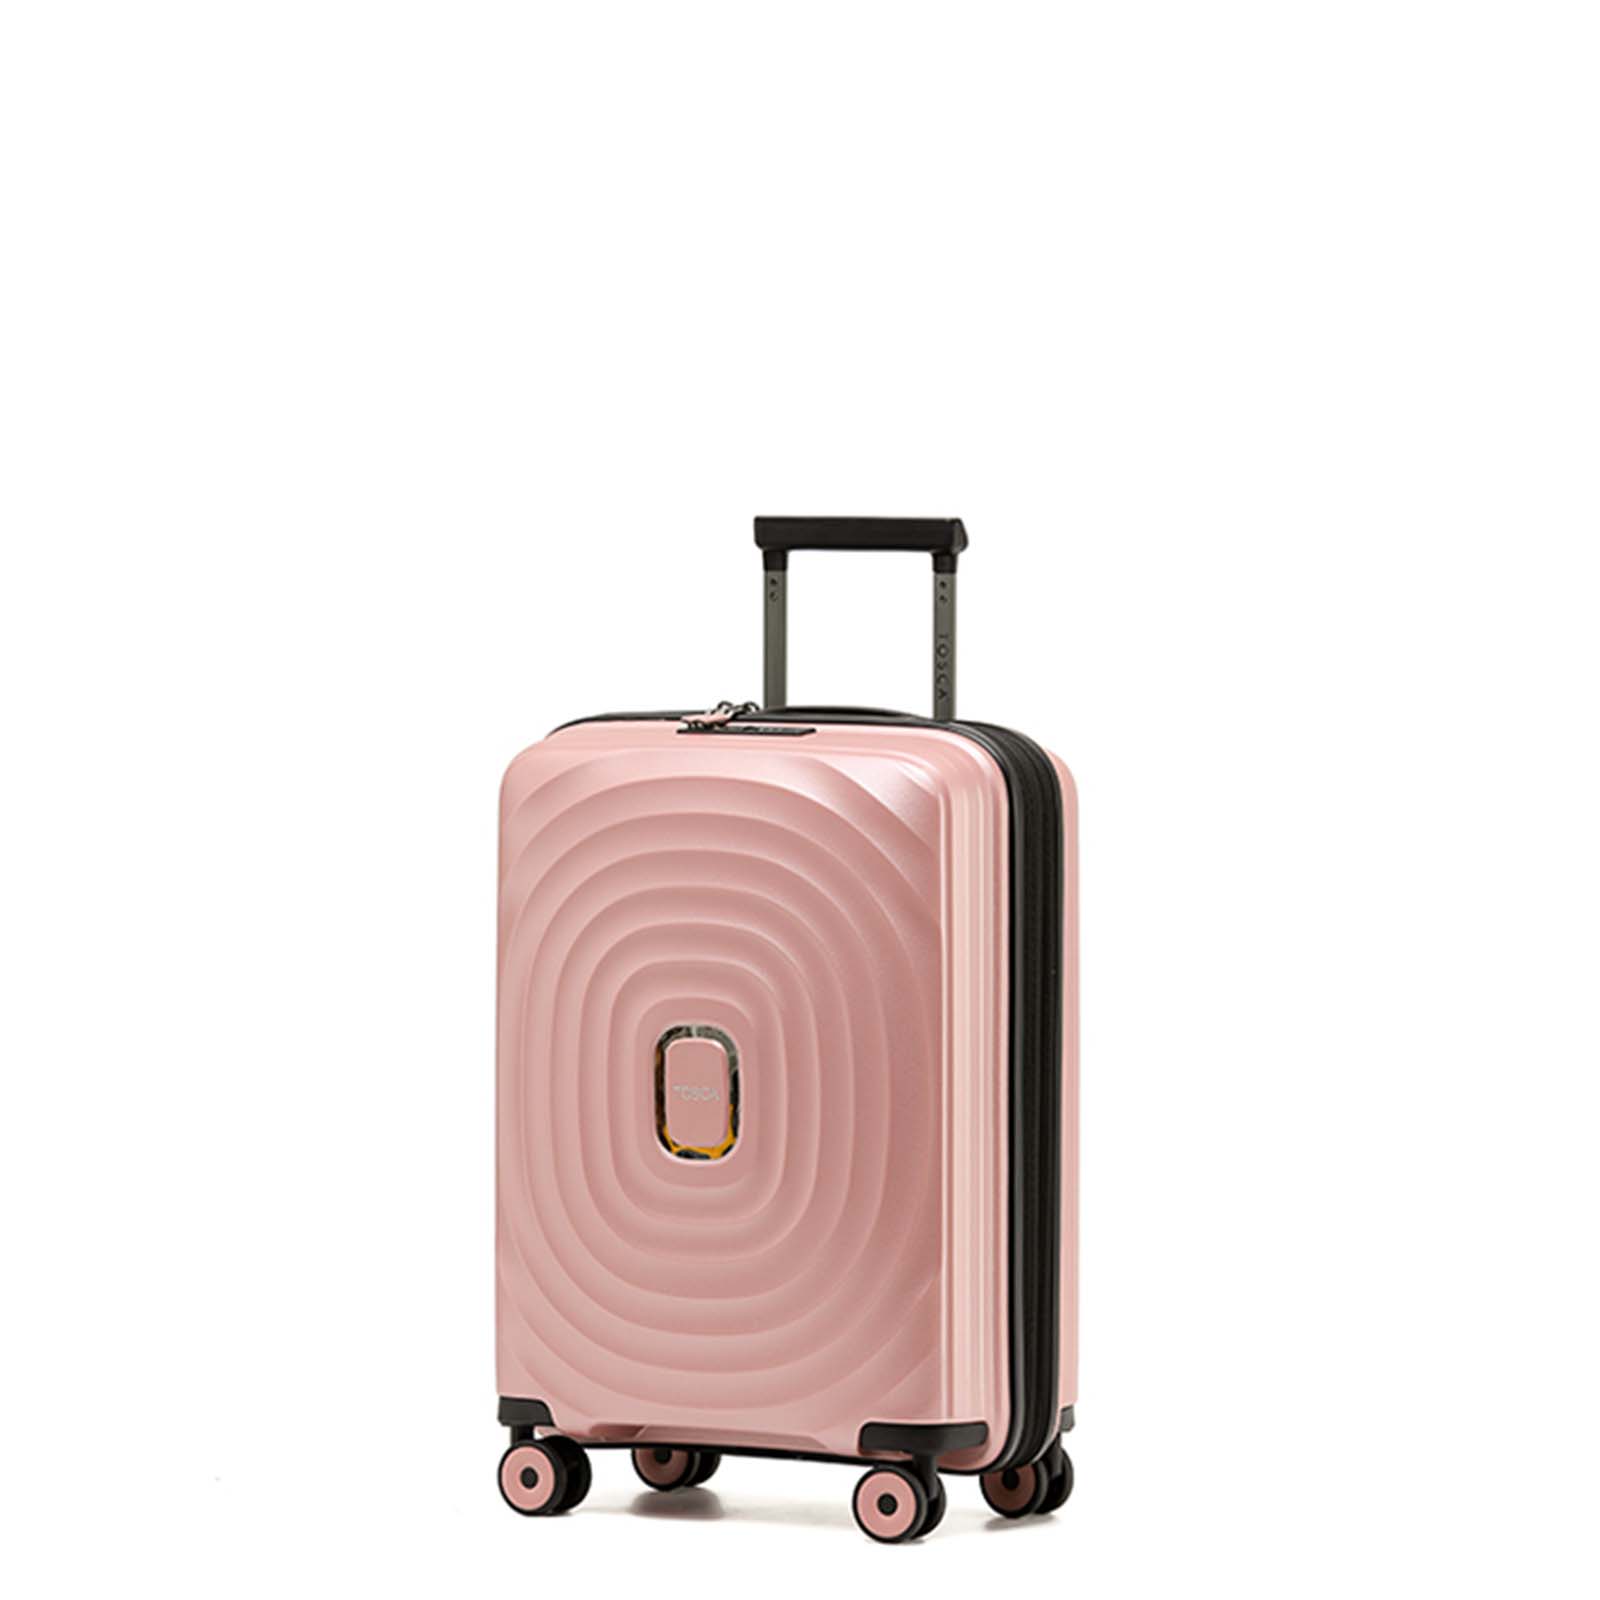 tosca-eclipse-4-wheel-55cm-carry-on-suitcase-rose-gold-front-angle